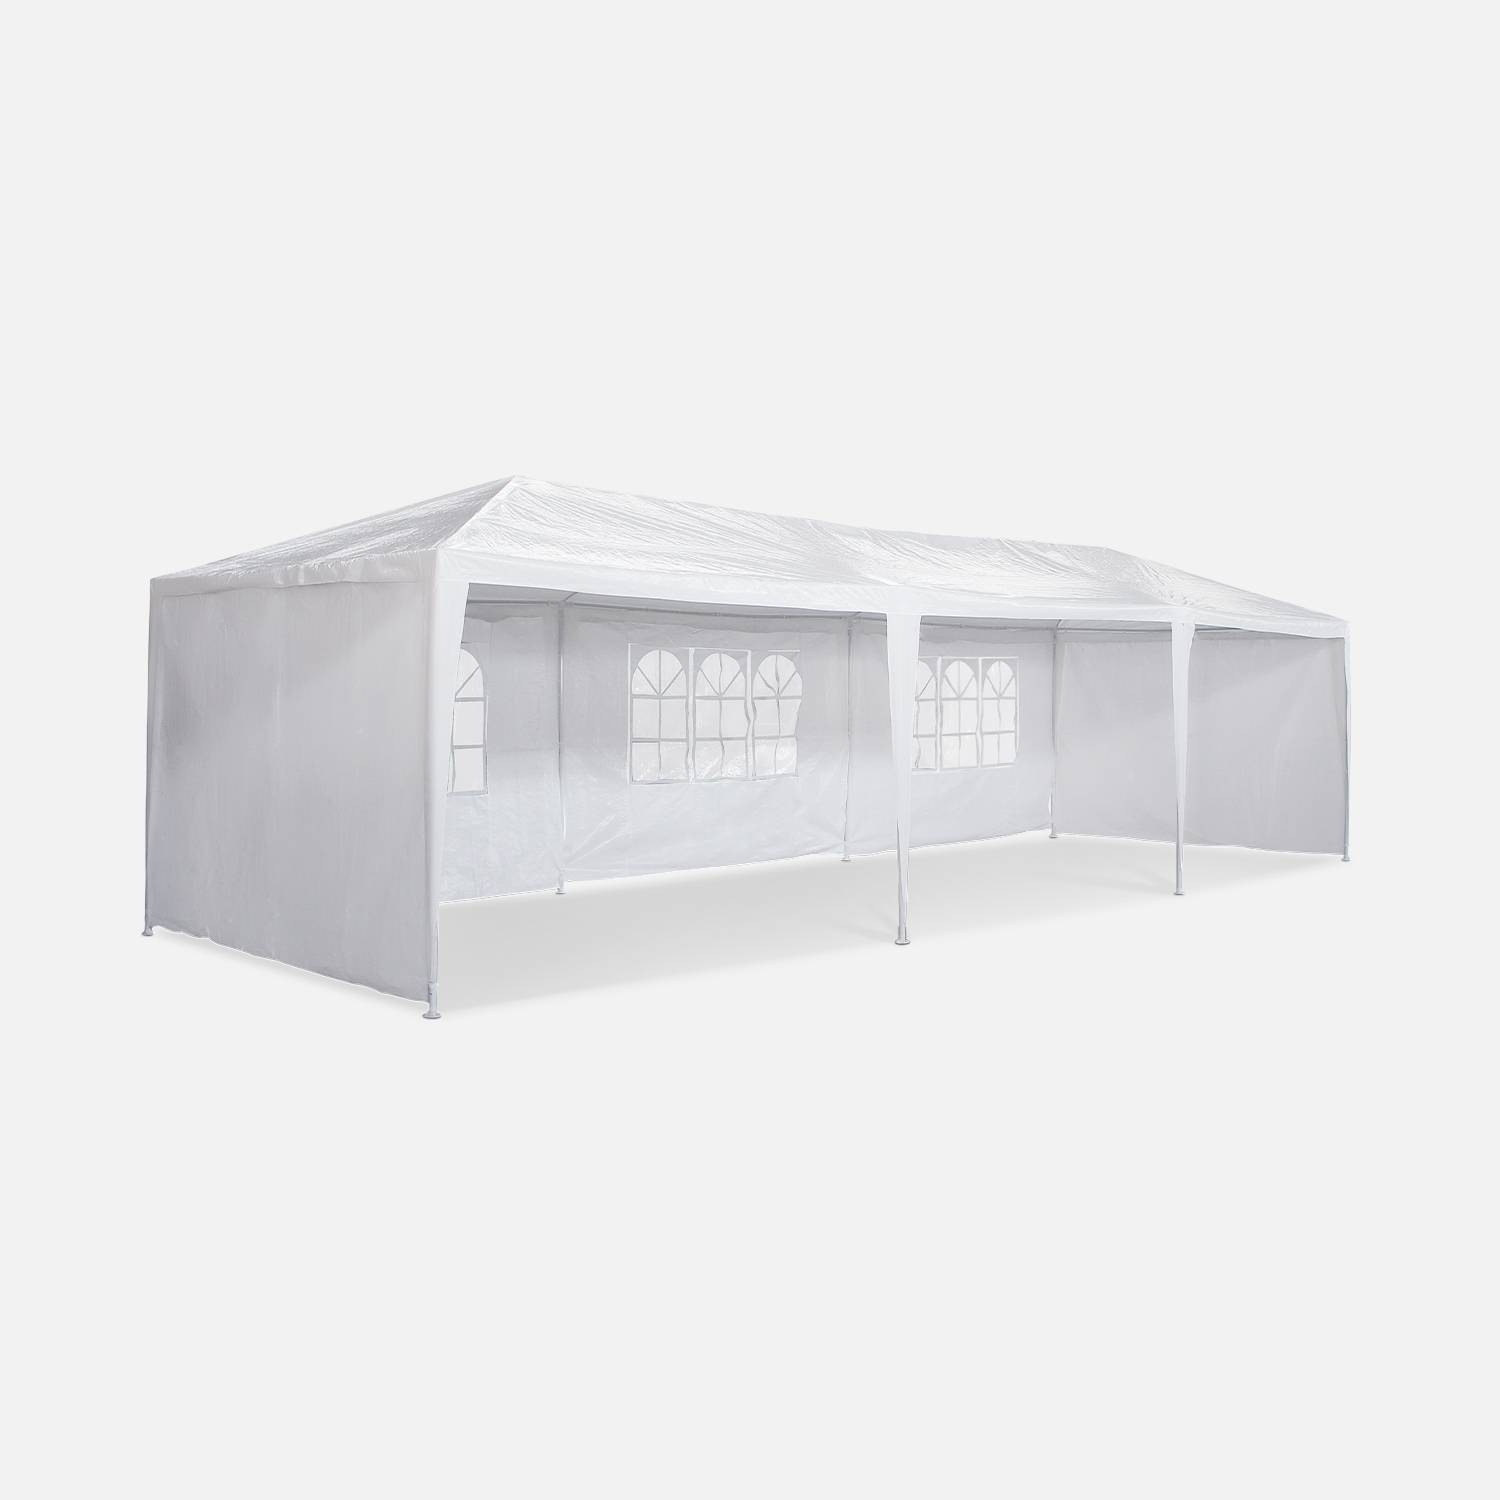 Reception tent 3x9m, 27 m² - Massilia - White - Can be used as a pavilion, pergola, garden tent, marquee or arbour. Photo3